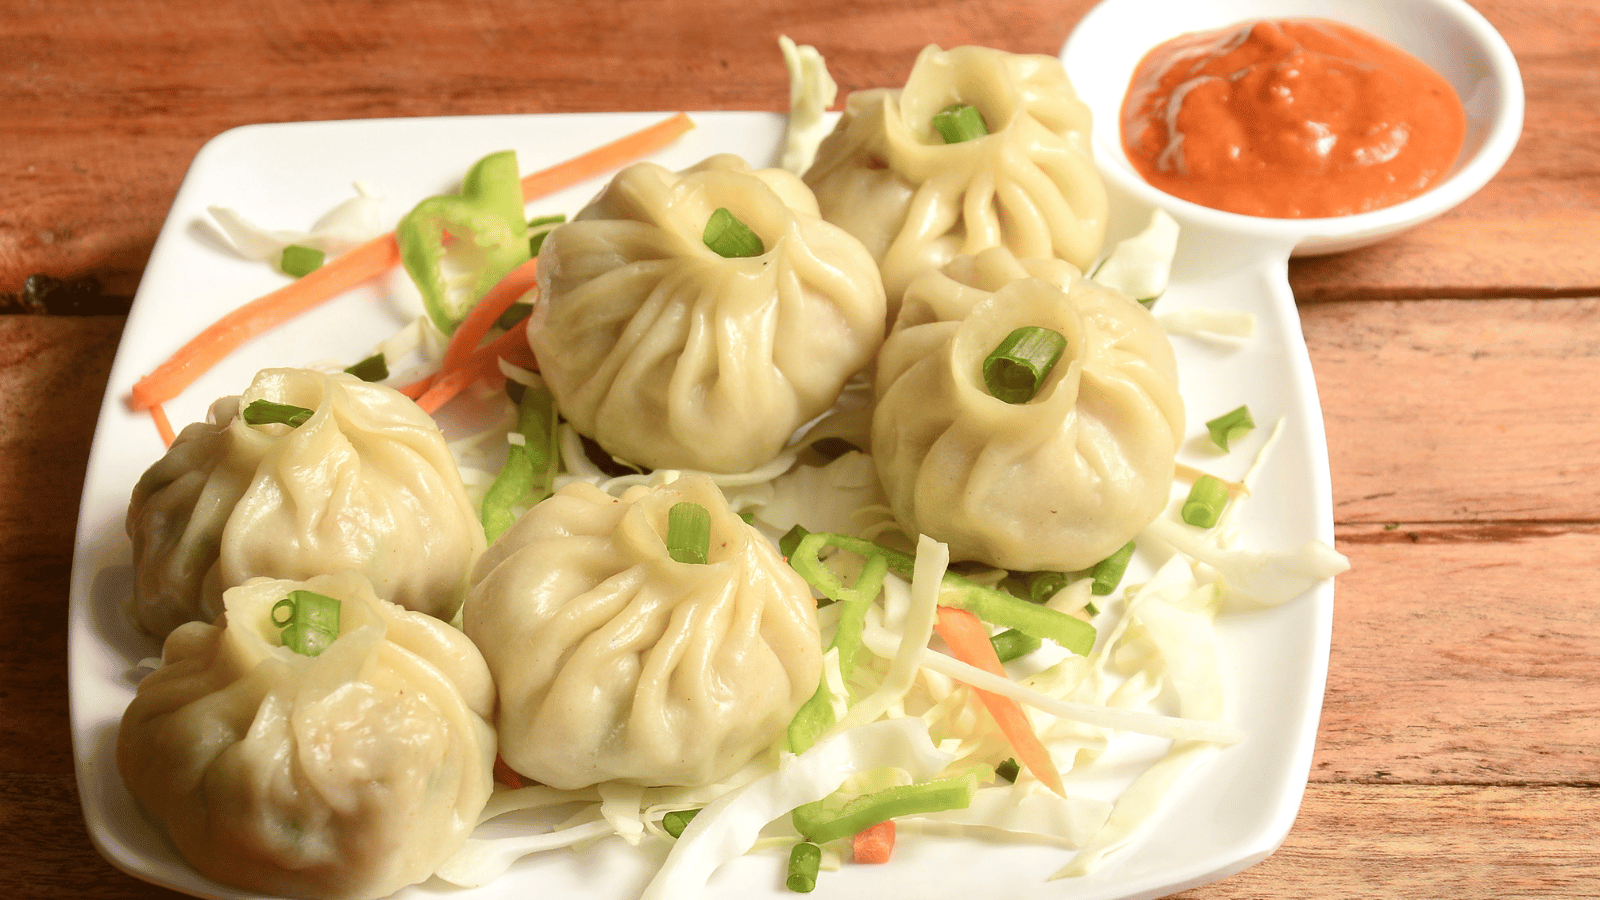 Six steamed dumplings on a bed of sliced carrots and cabbage sitting on white plate with red dipping sauce in corner